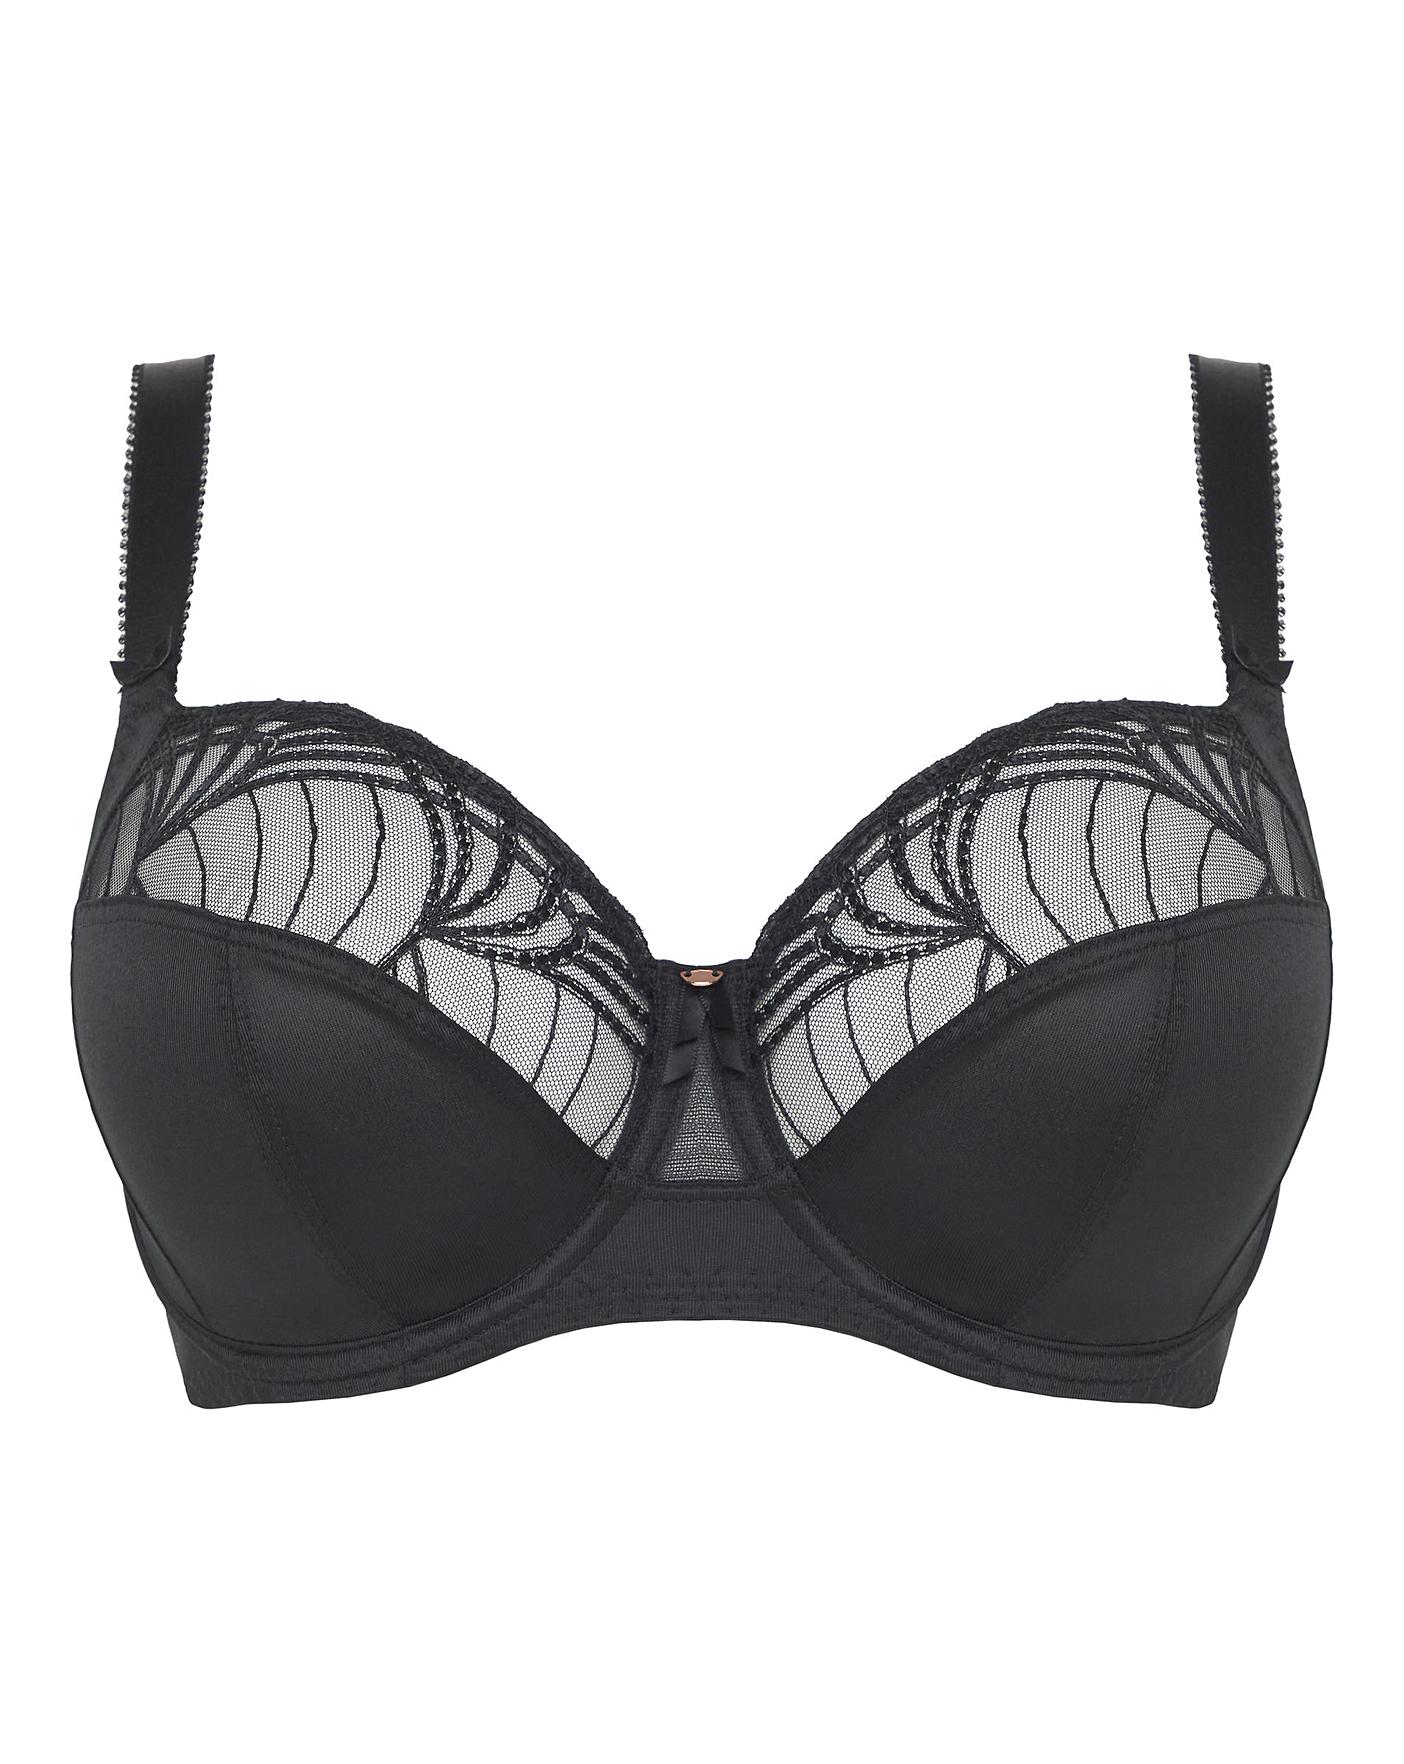 Fantasie Adelle Full Cup Wired Bra | J D Williams